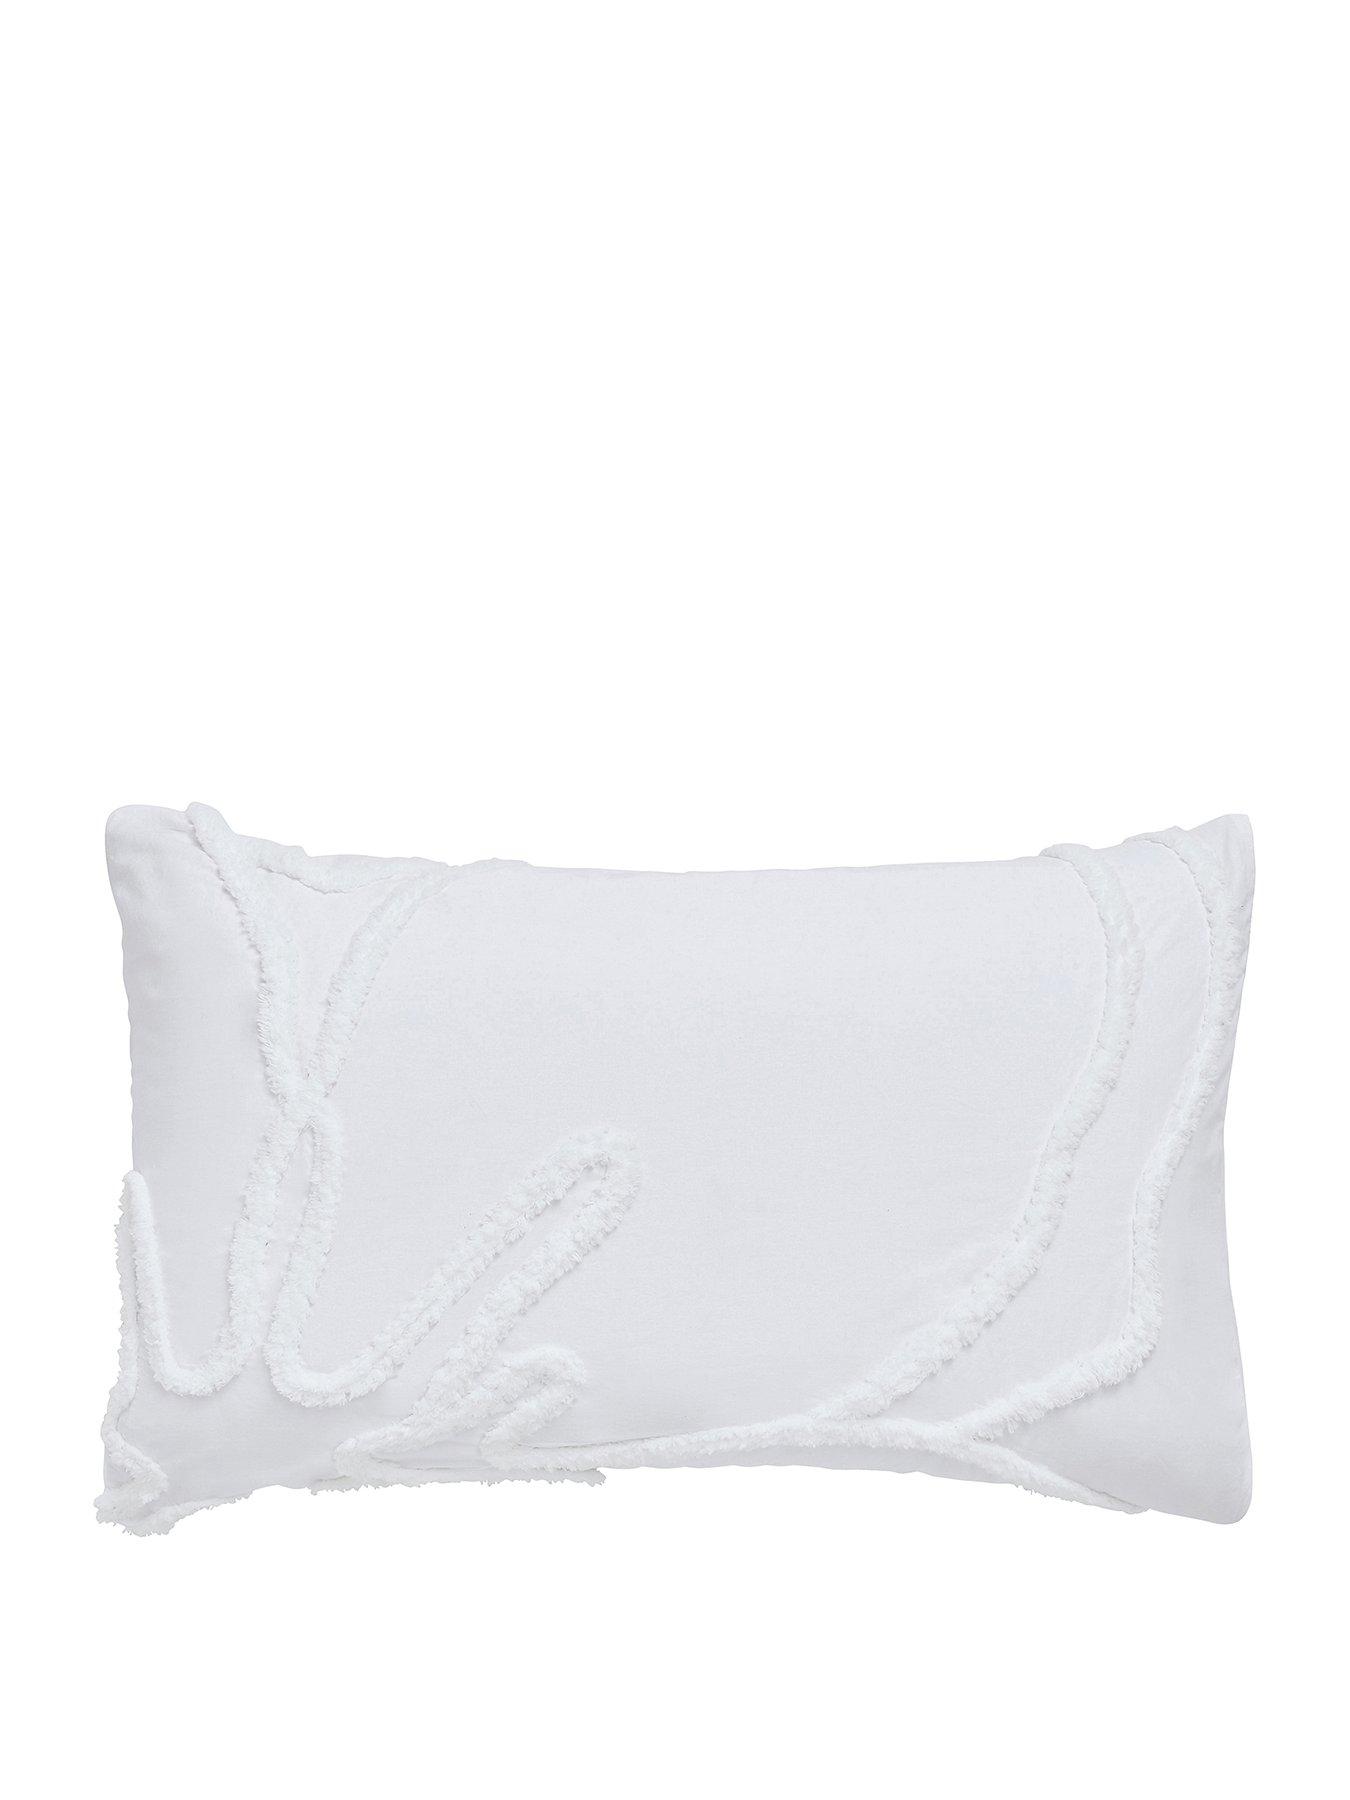 Ted Baker Magnolia Tufted Pillowcase - White at discount prices of 56% ...